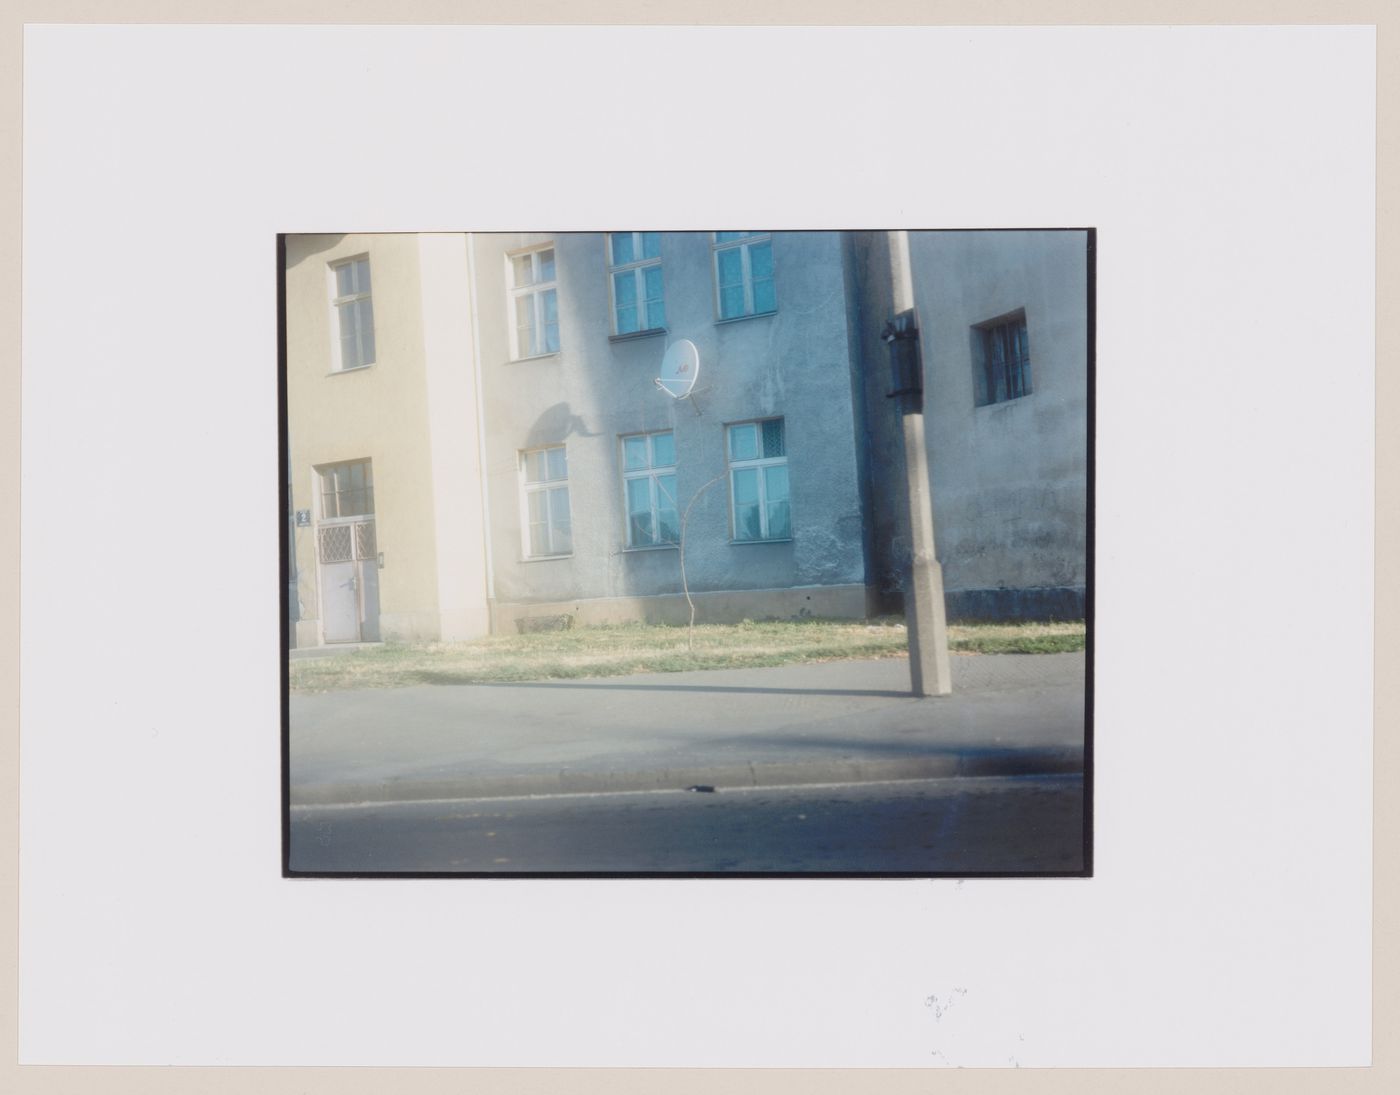 View of an apartment house showing a satellite home antenna, Gronowo, near Braniewo, Poland (from the series "In between cities")